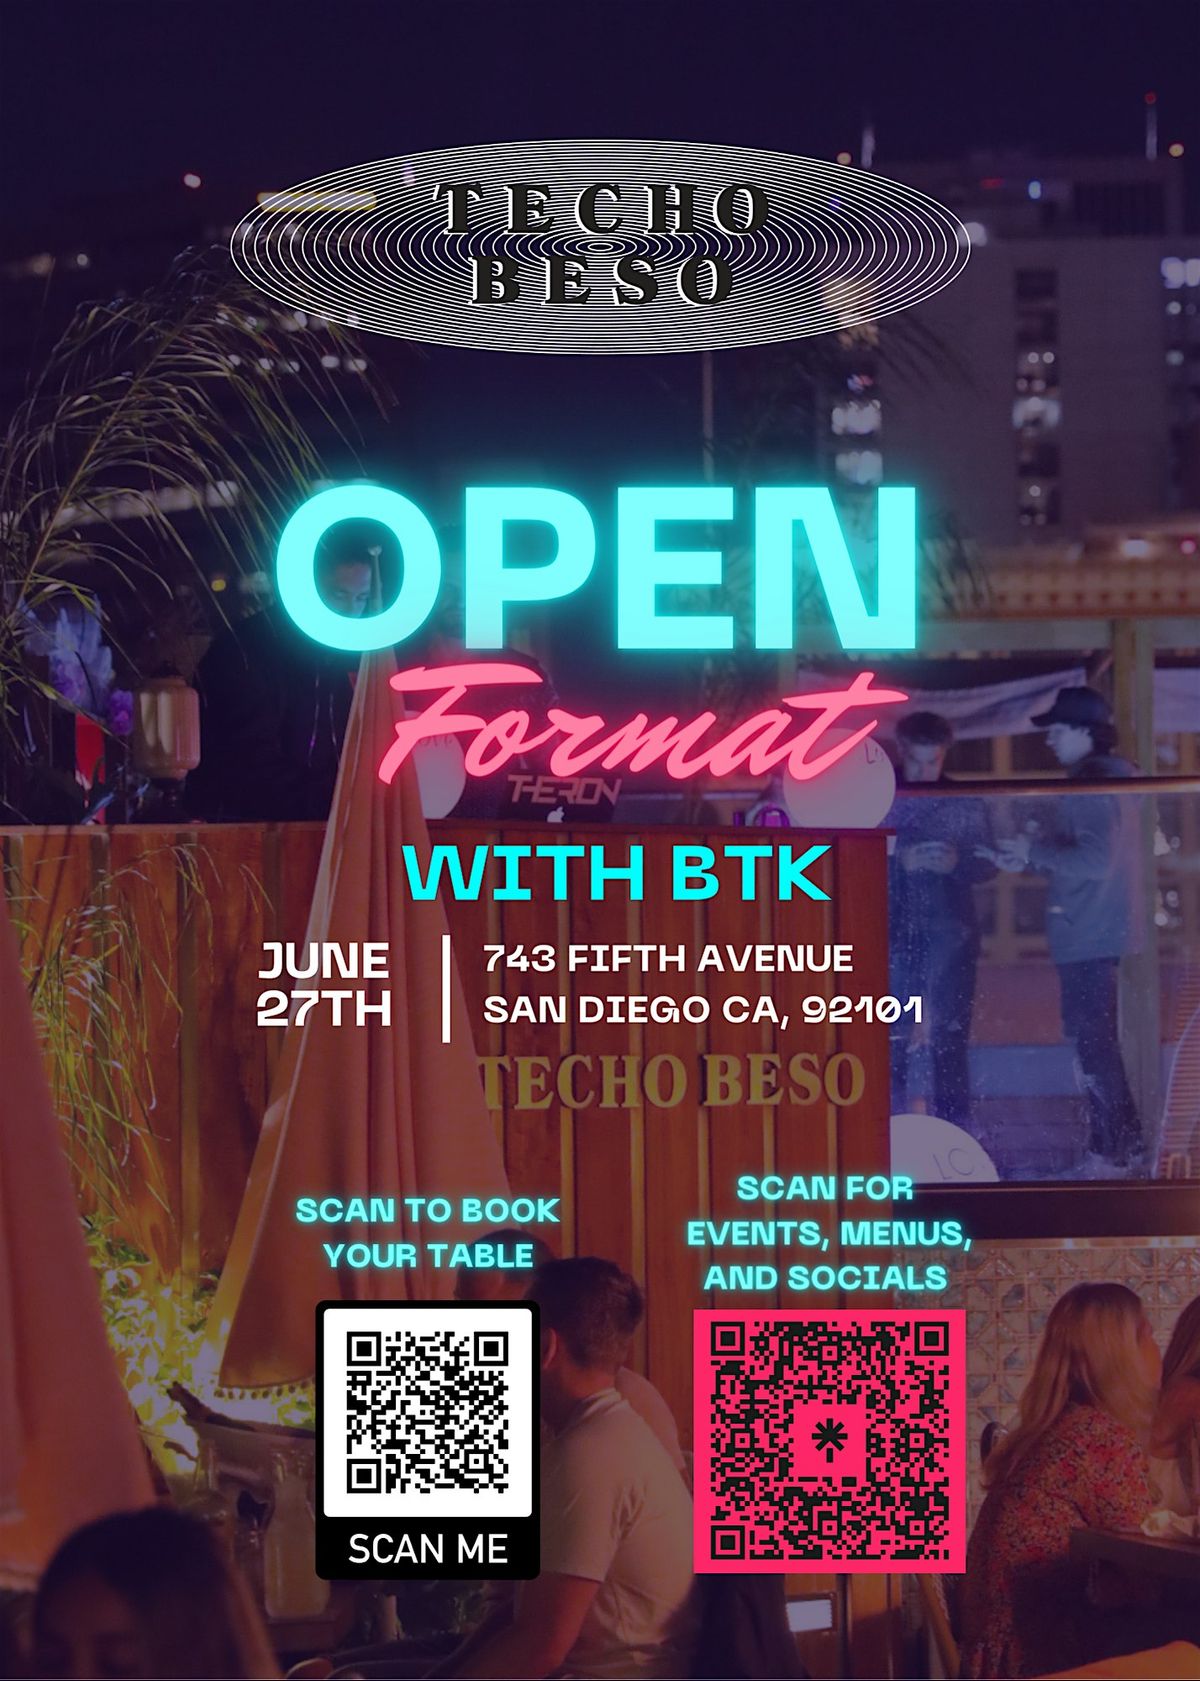 OPEN FORMAT AT TECHO BESO WITH DJ BTK